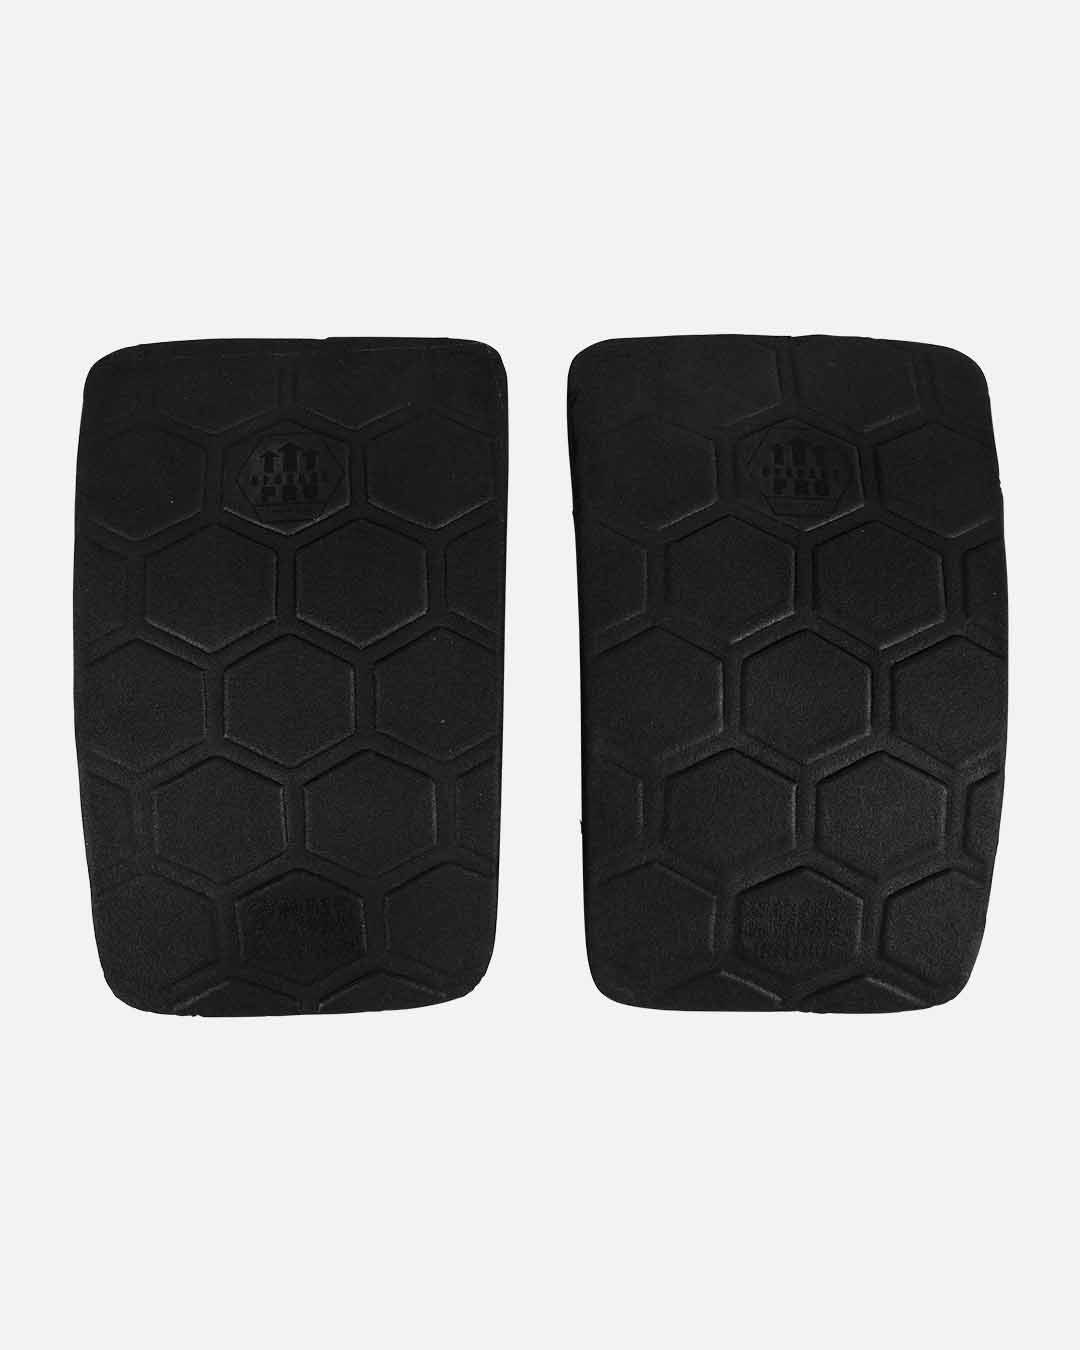 PADDING UPGRADE PRO 2-PACK FIRM